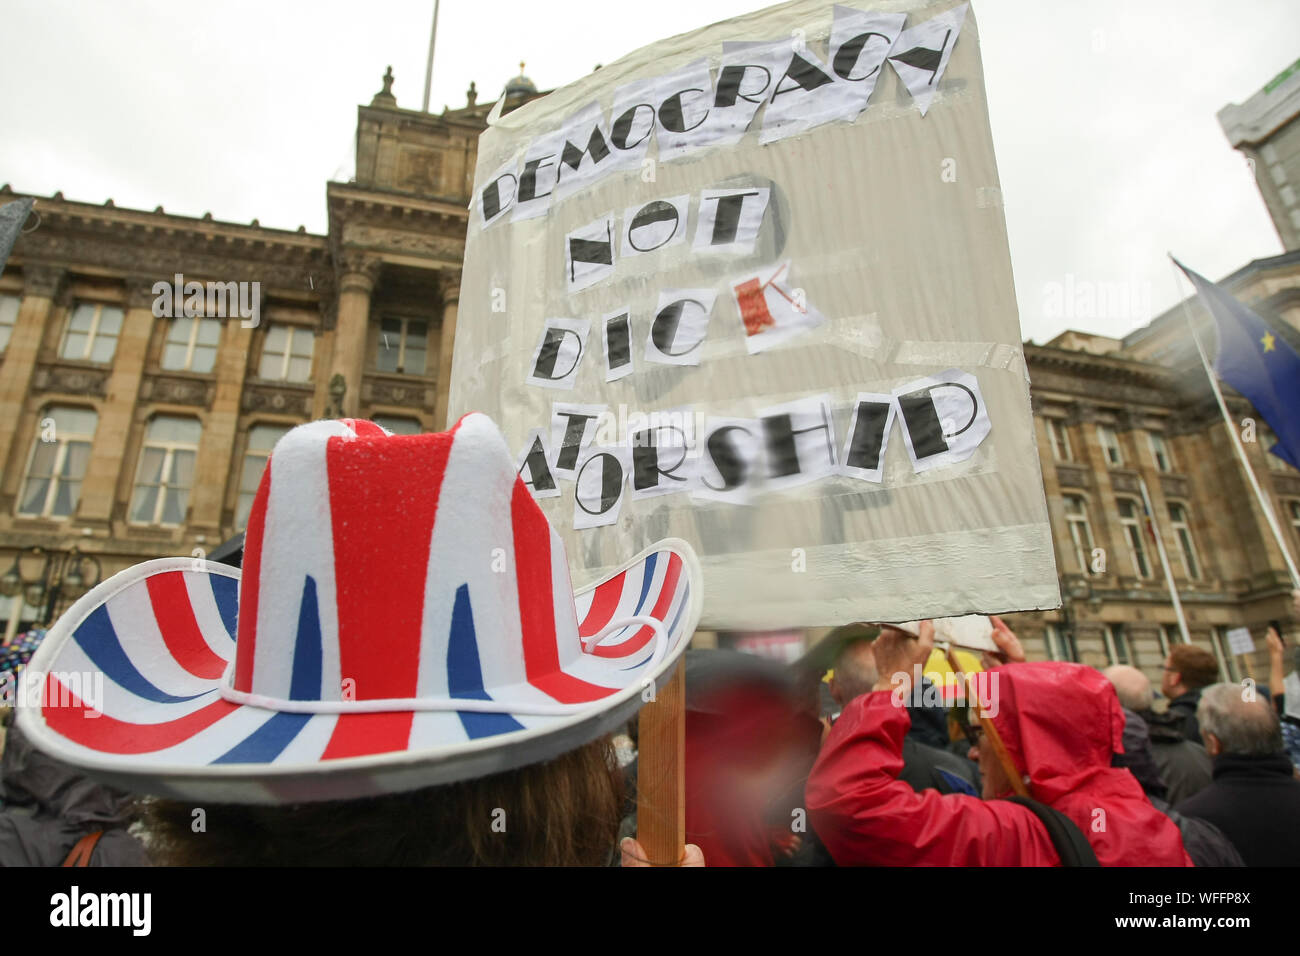 Birmingham, UK. Hundreds gather in Victoria Square, Birmingham city centre, to protest against UK Prime Minister Boris Johnson's decision to suspend Parliament in the run-up to Brexit. Credit: Peter Lopeman/Alamy Live News Stock Photo